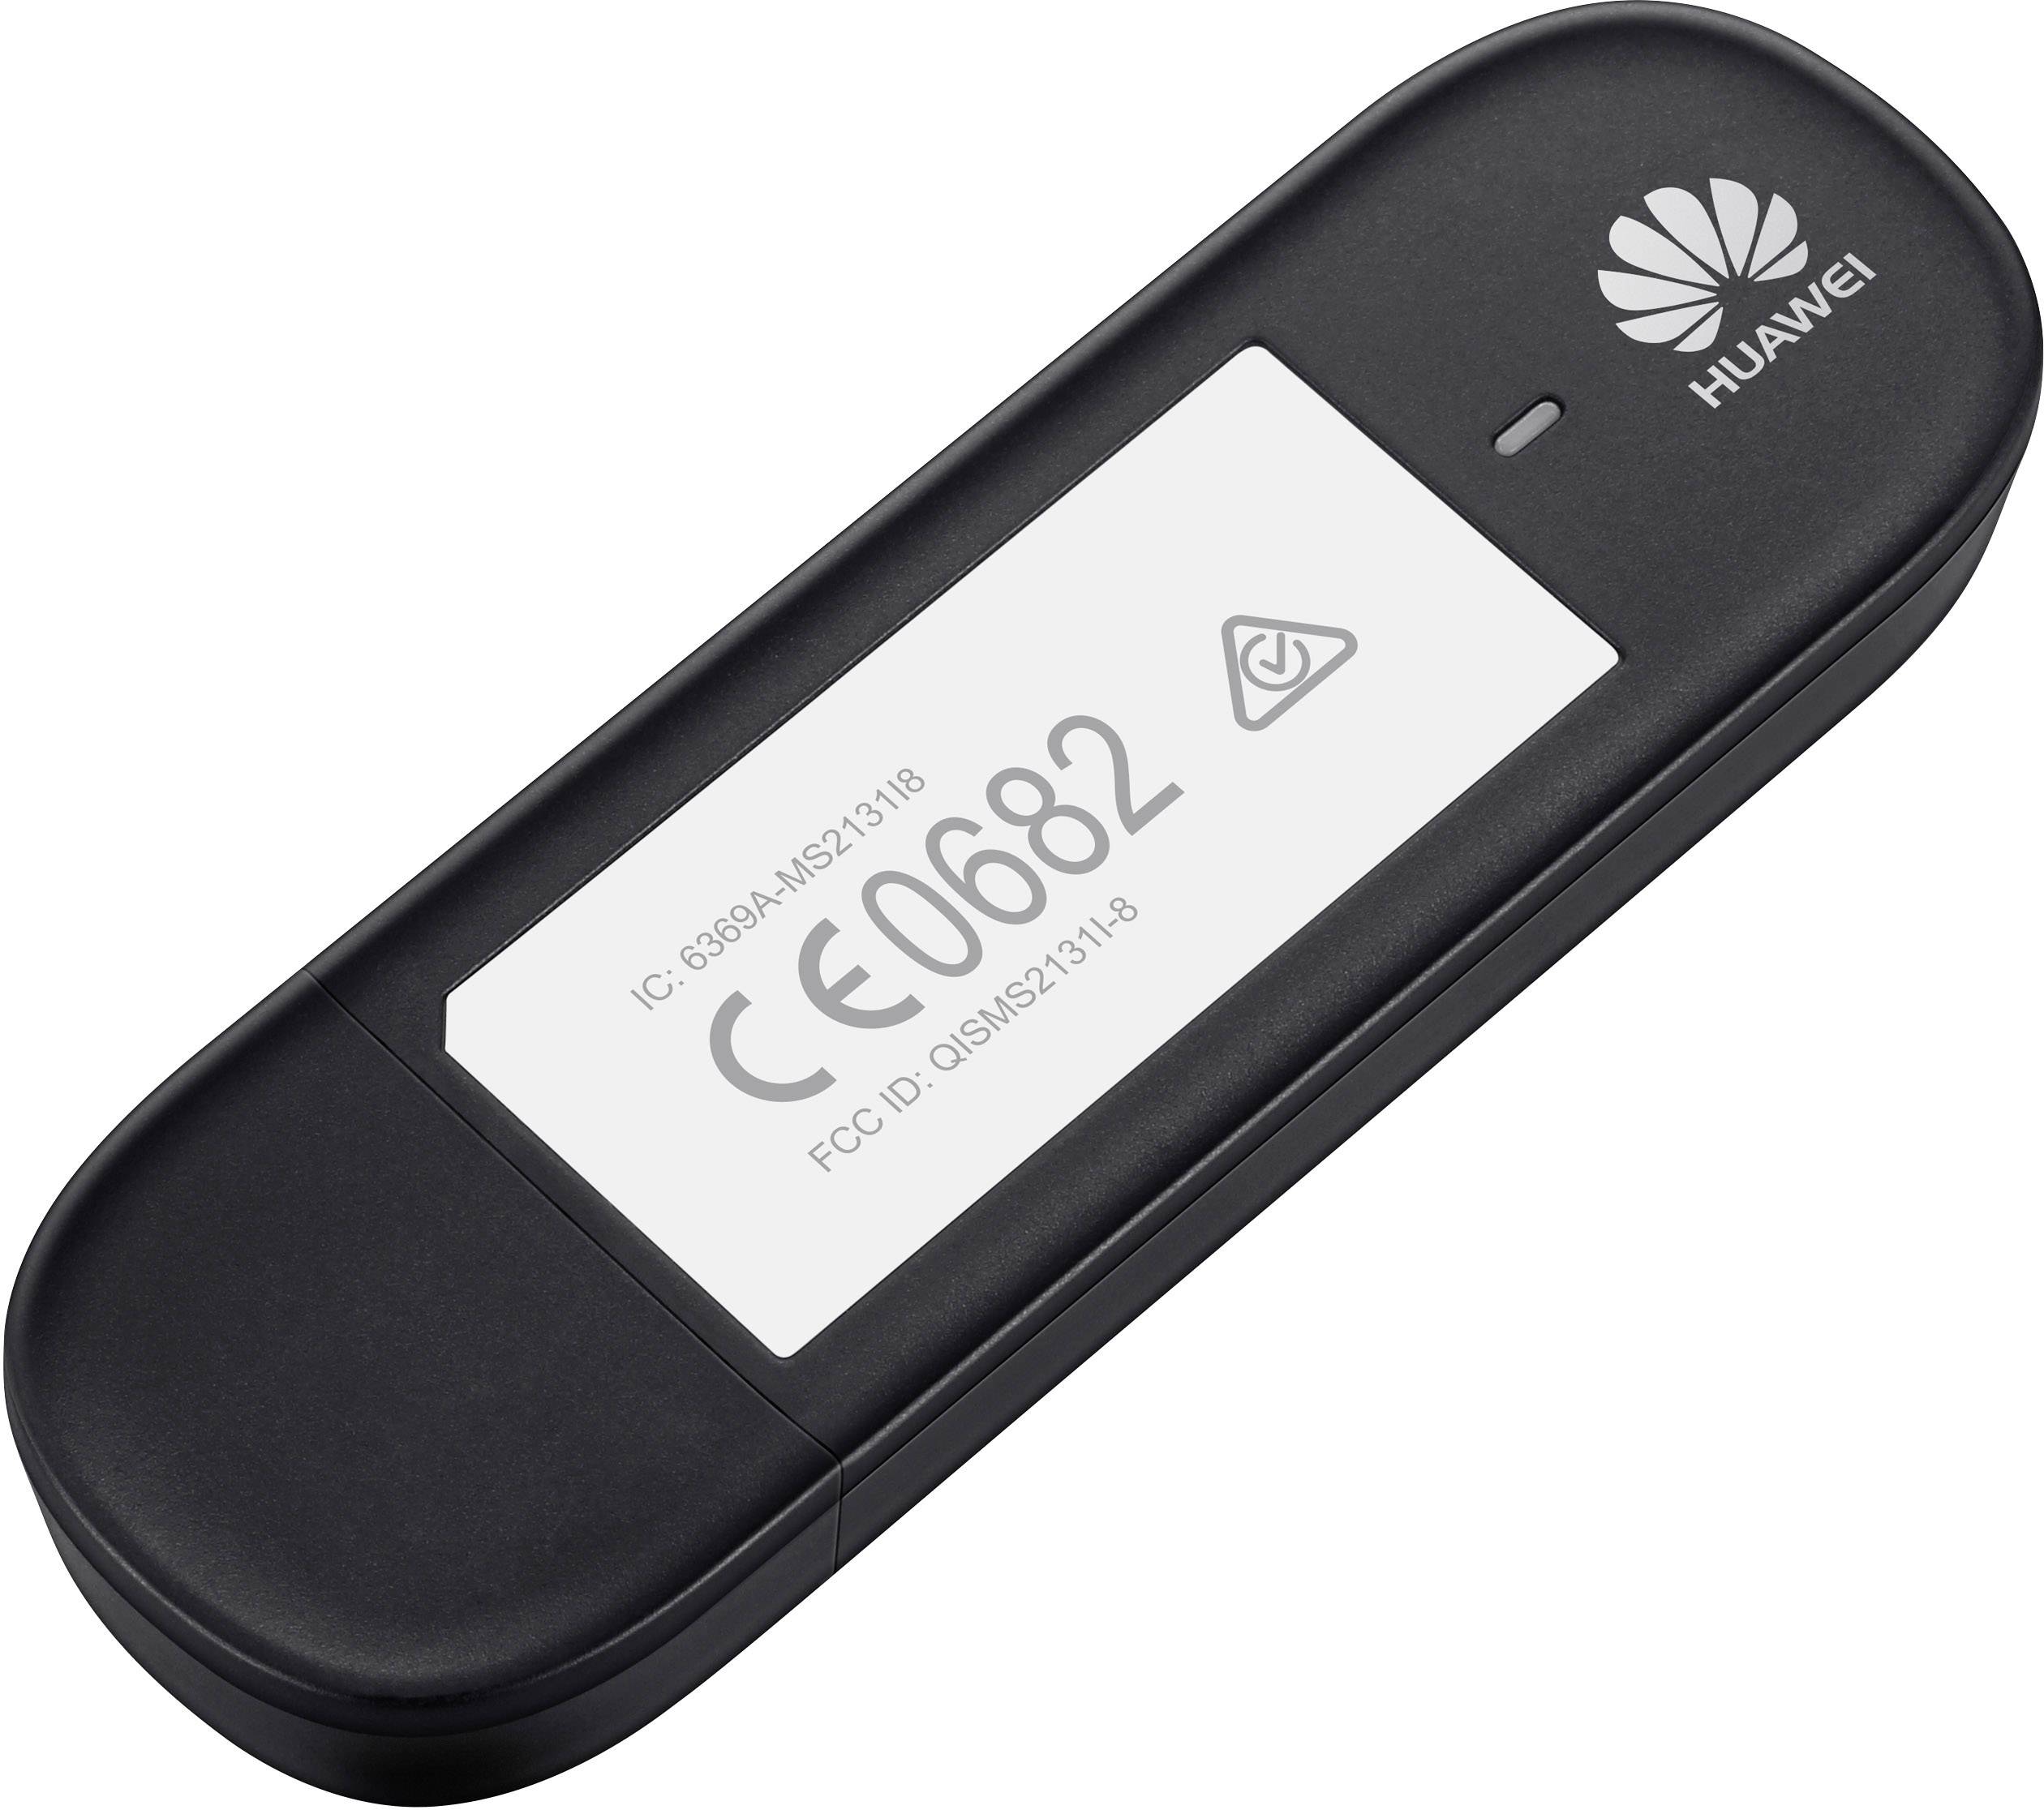 huawei mobile modem driver download